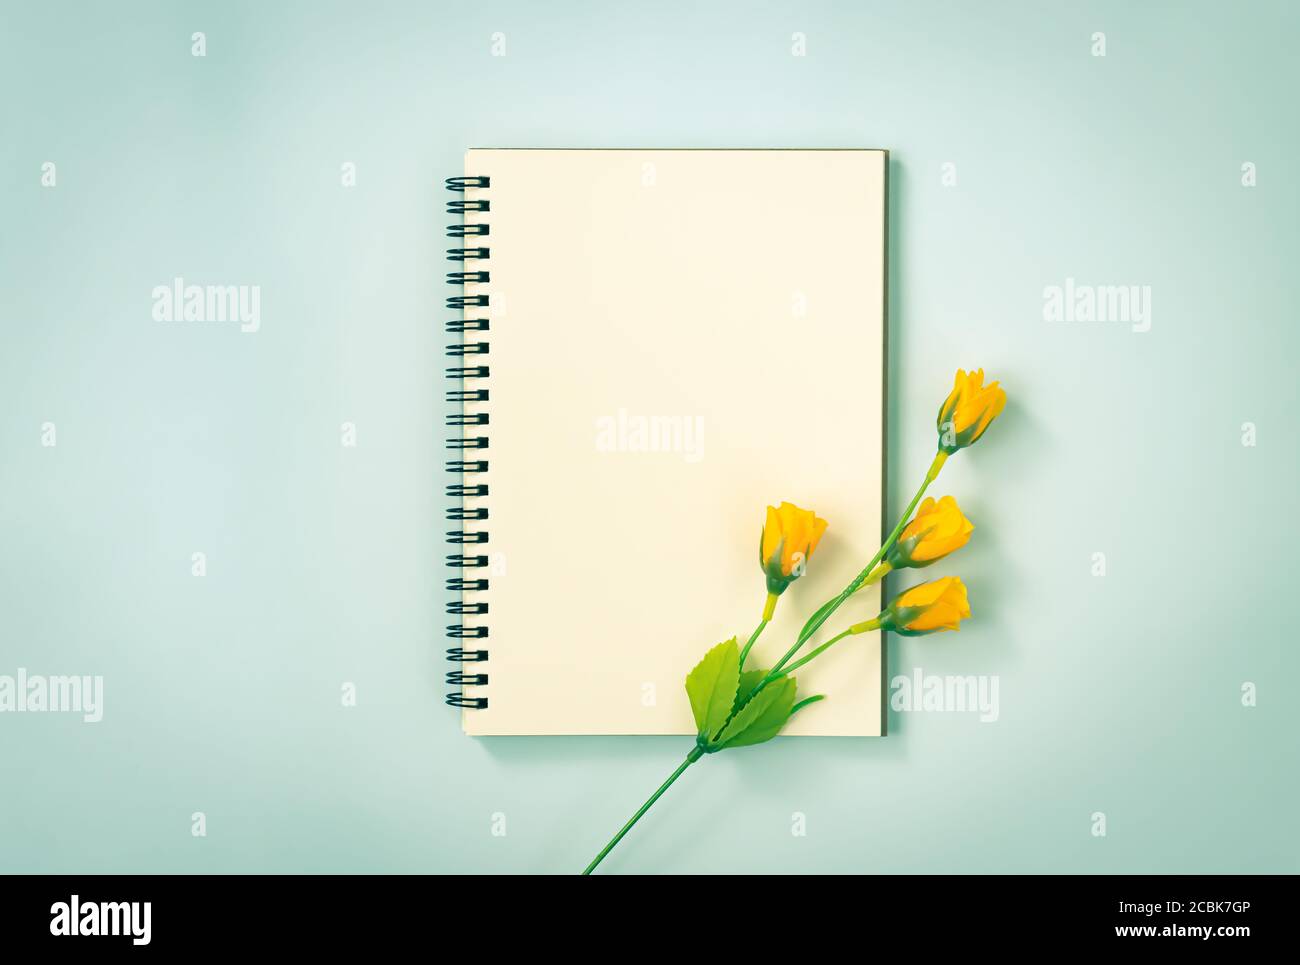 Spiral Notebook or Spring Notebook in Unlined Type and 4 Orange Flowers at Bottom Right on Blue Pastel Minimalist Background. Spiral Notebook Mockup o Stock Photo